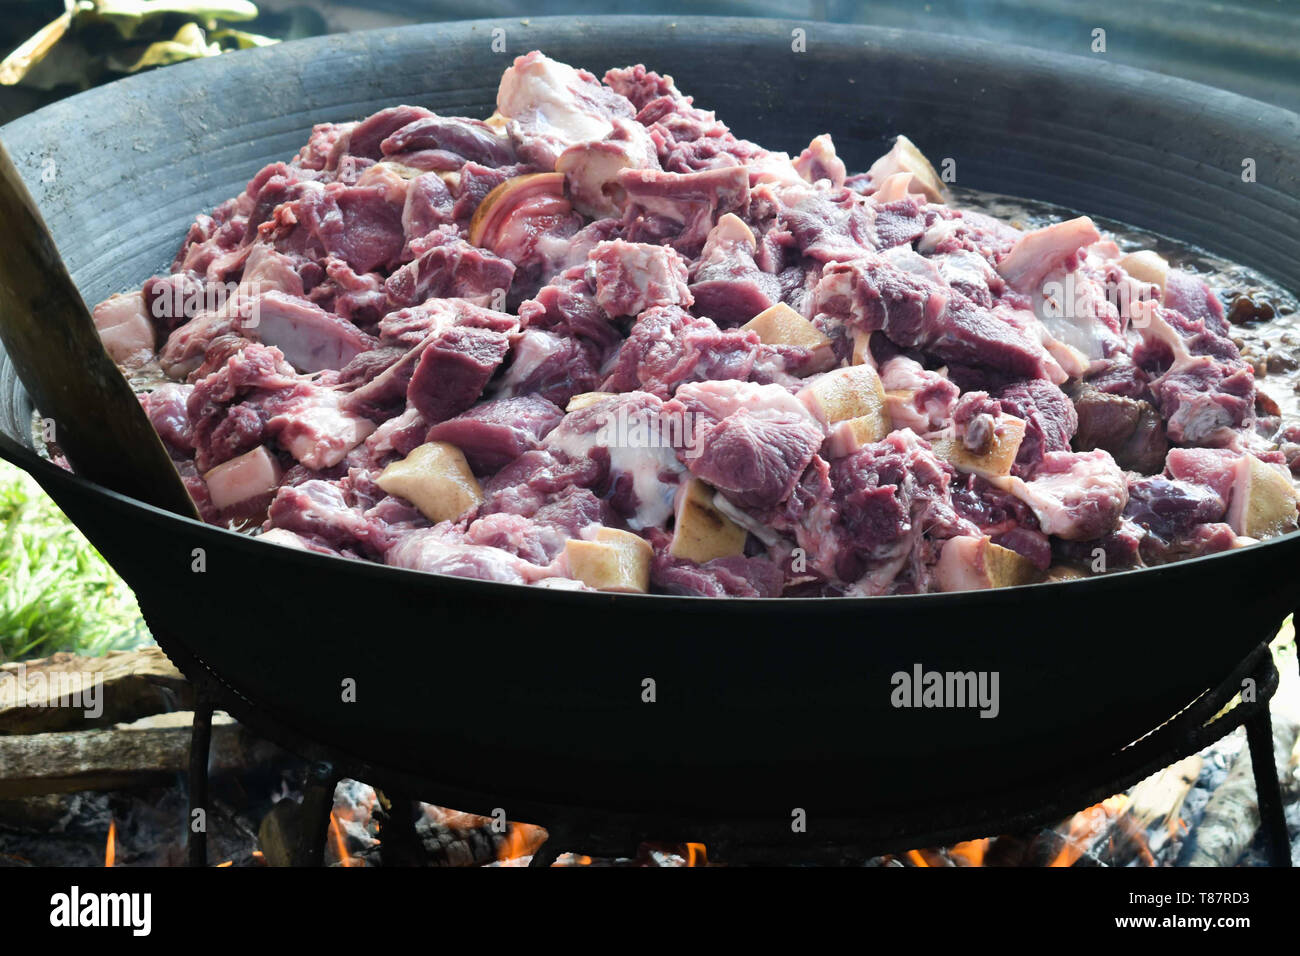 https://c8.alamy.com/comp/T87RD3/small-sliced-meat-cooked-on-a-a-very-big-pan-using-fire-wood-raw-meat-T87RD3.jpg